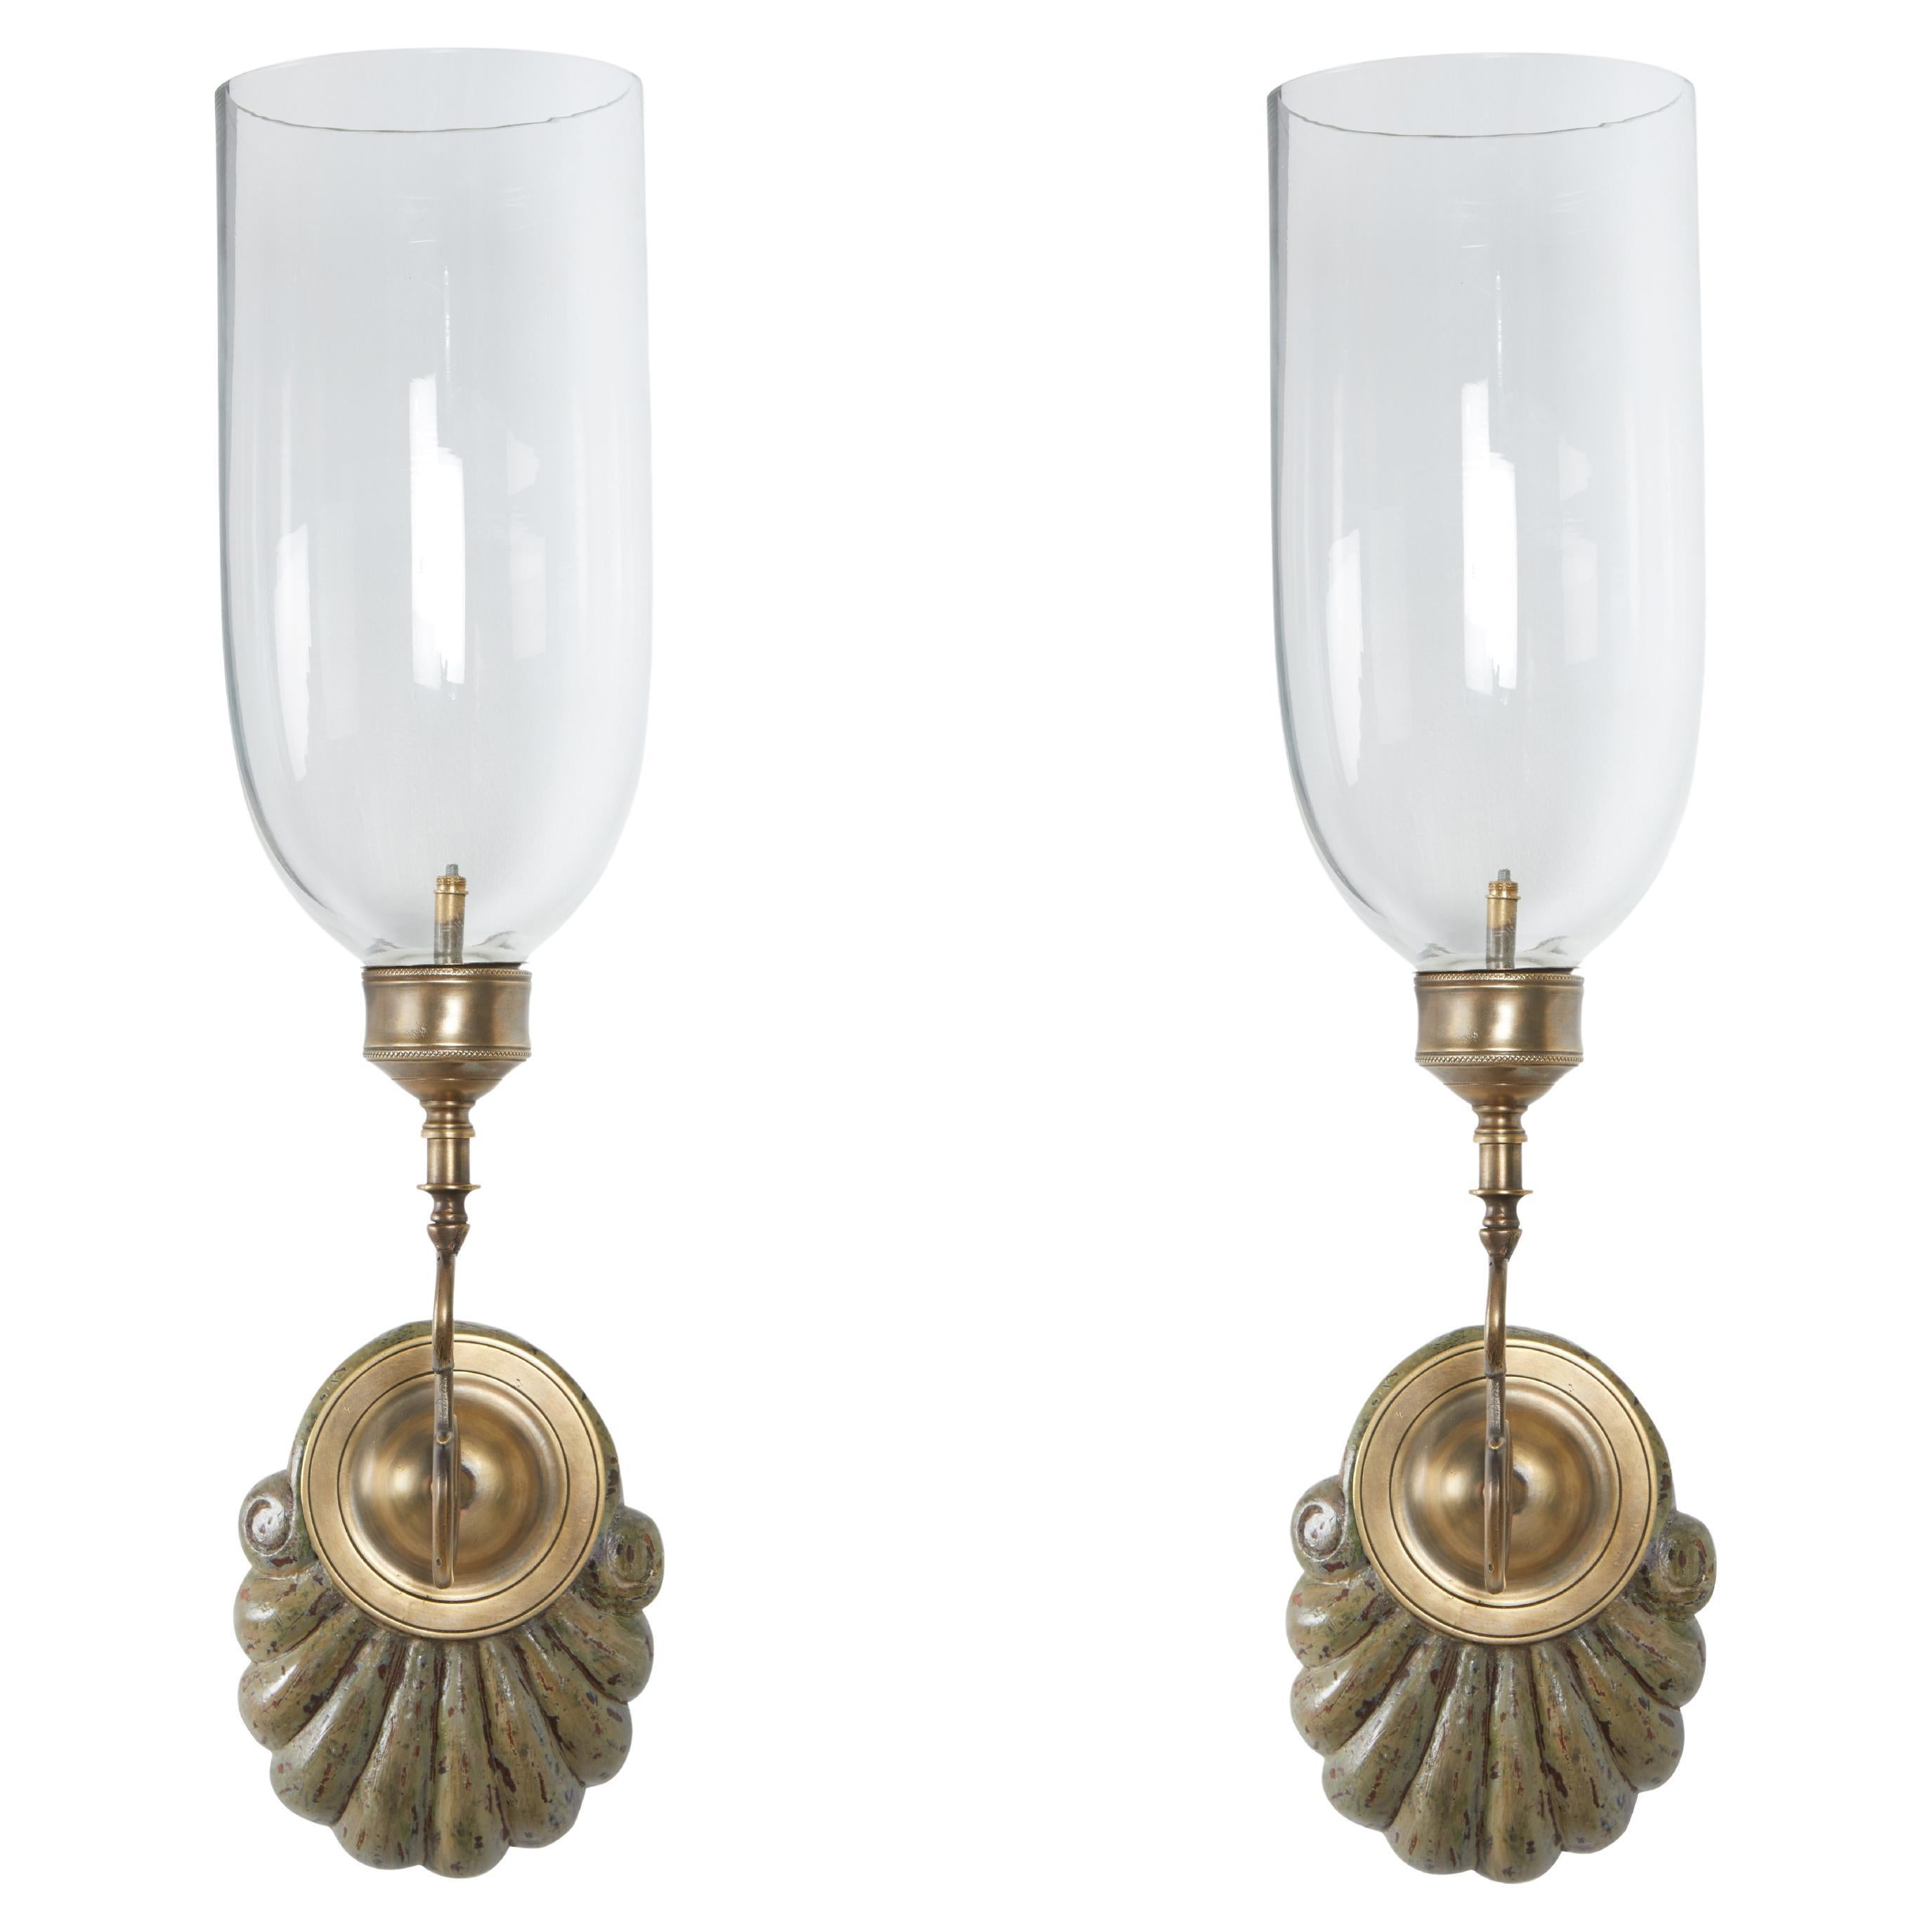 Pair of David Duncan Hurricane Sconces with Painted Scallop Shell Backplates